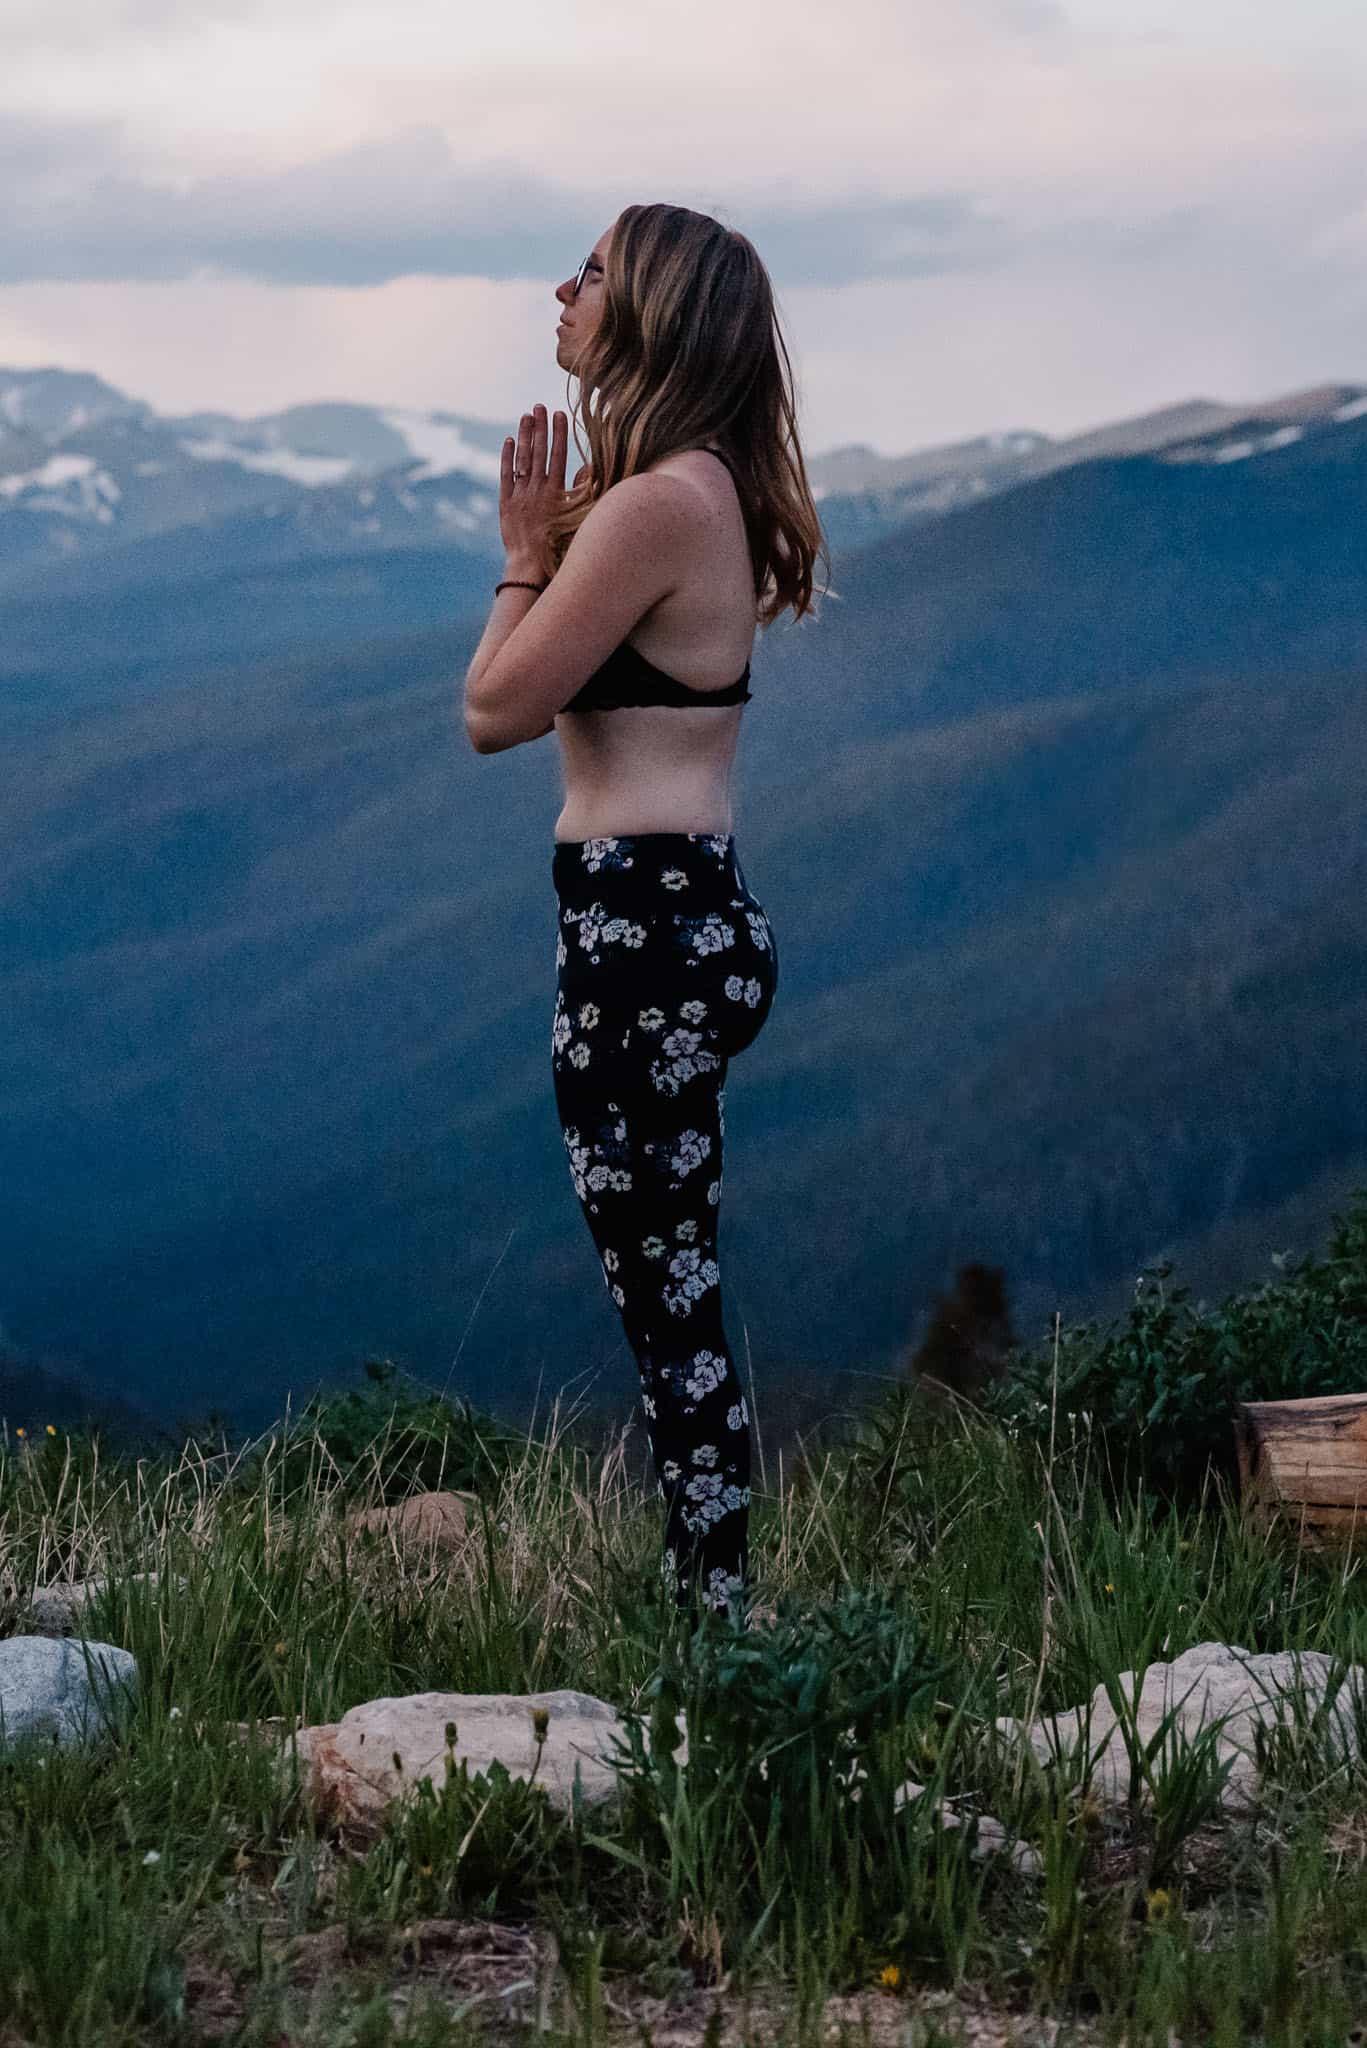 Emmy in namaste mudra doing yoga for wrists in mountain pose on top of a mountain